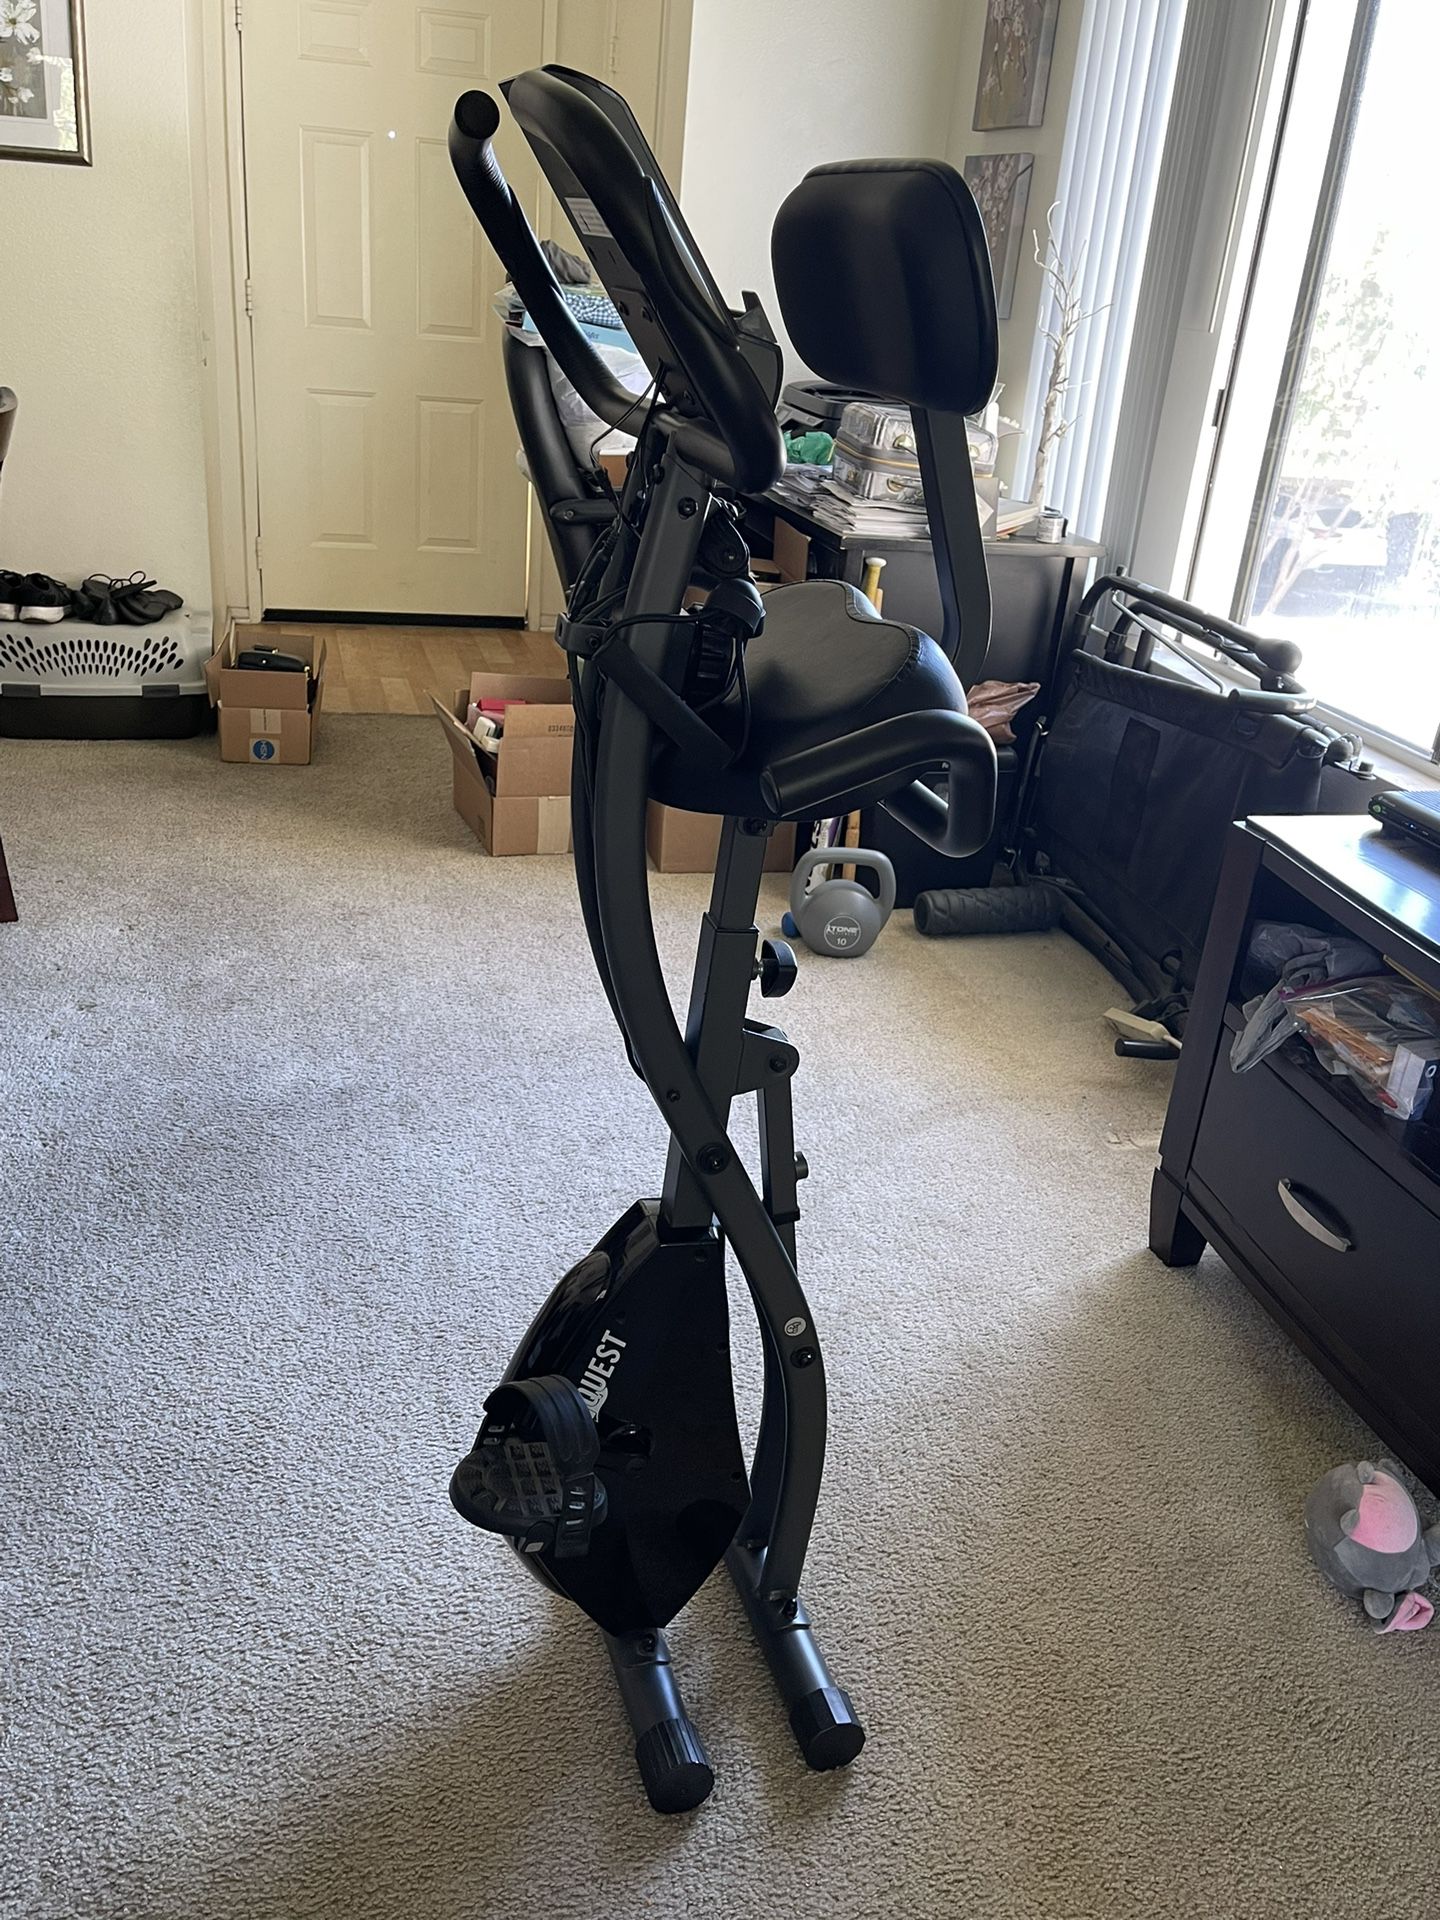 Fitquest Black/Graphite Color Stationary Exercise Bike 